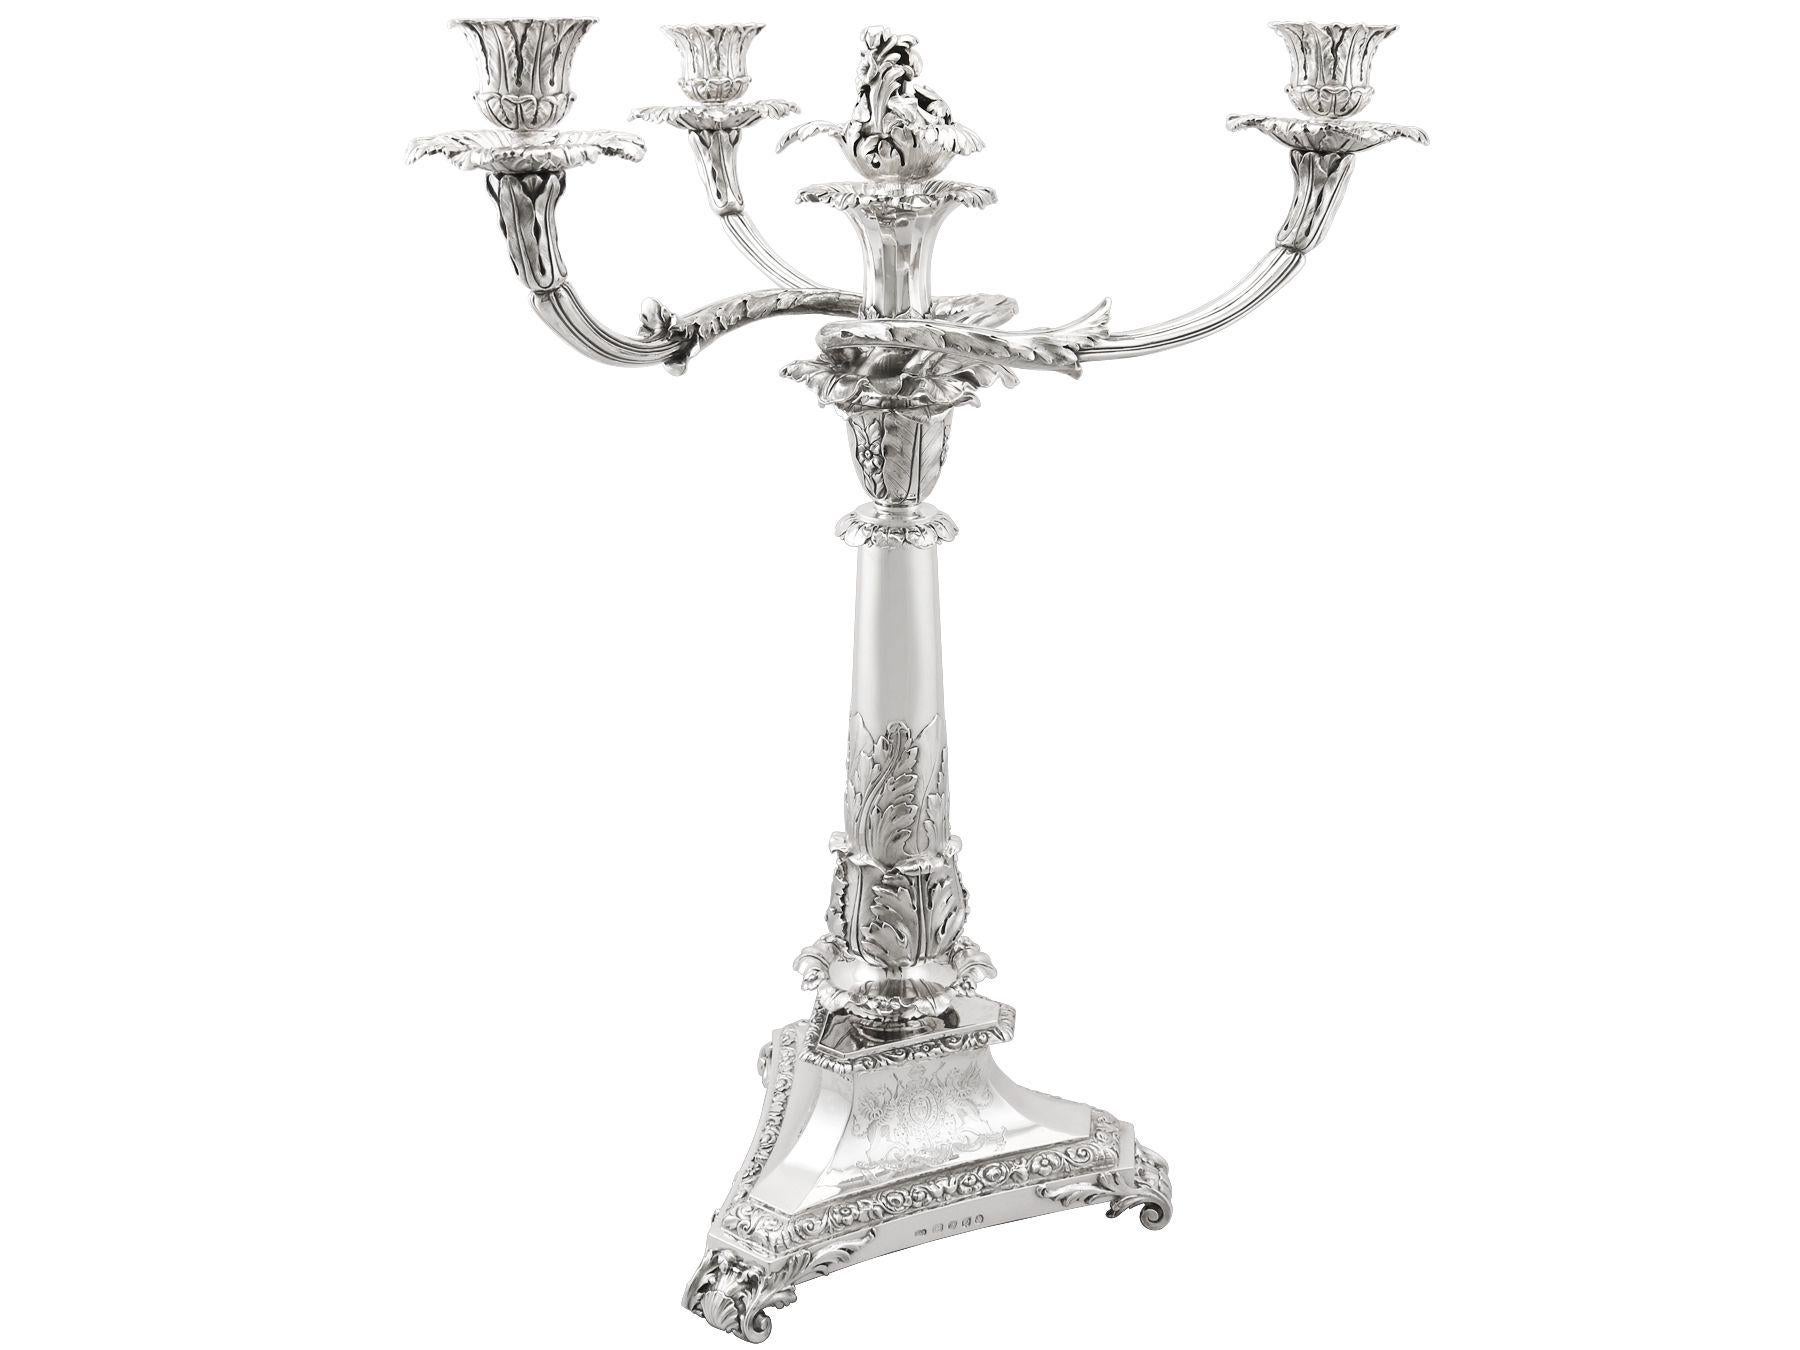 A magnificent, fine and impressive antique George IV English sterling silver three-light candelabrum centrepiece; an addition to our ornamental silverware collection.

This magnificent antique English sterling silver three light candelabrum has a